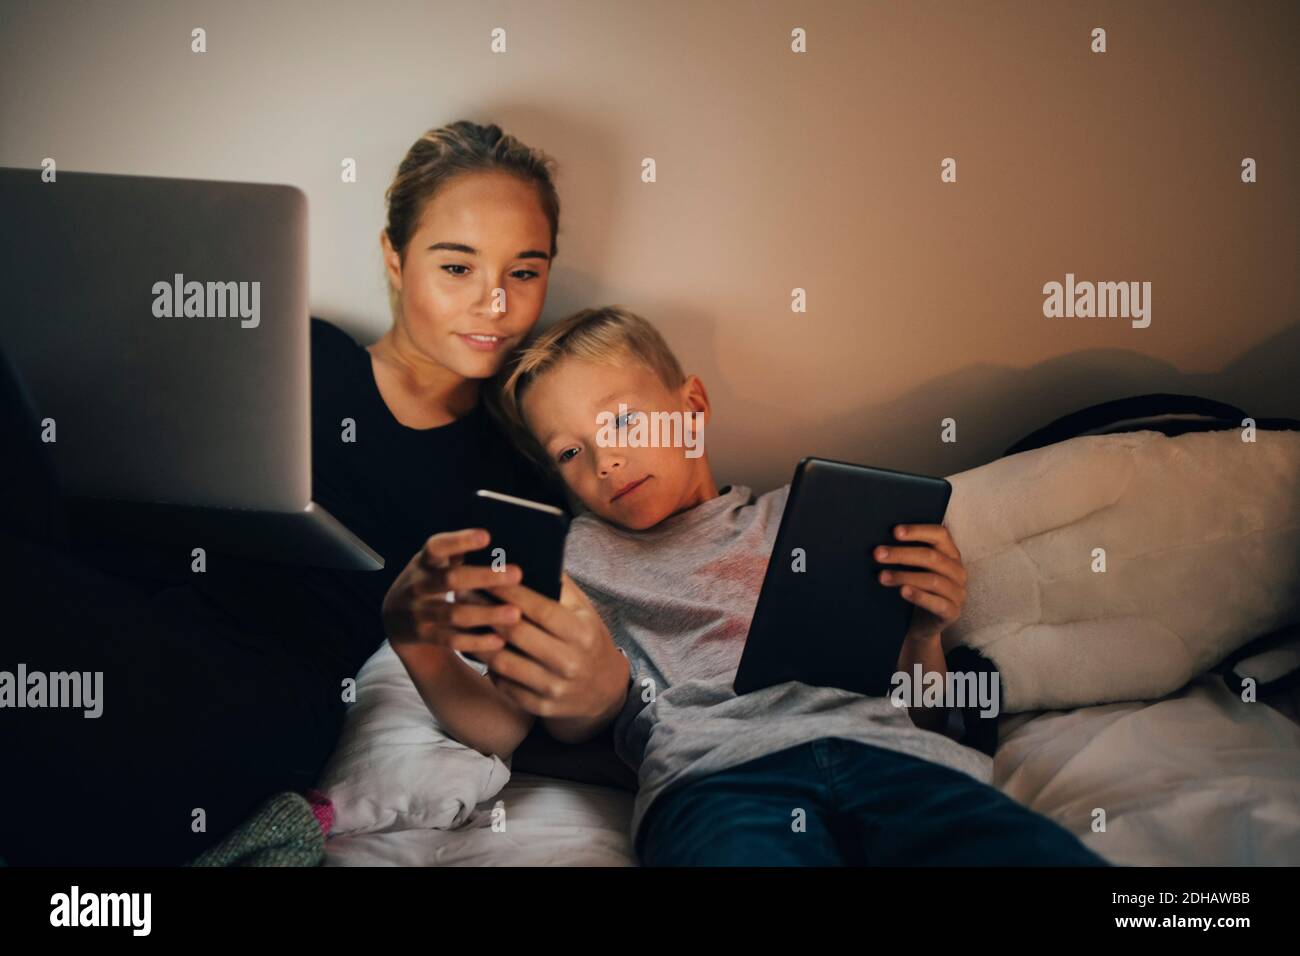 Siblings reclining on bed while sharing smart phone at home Stock Photo